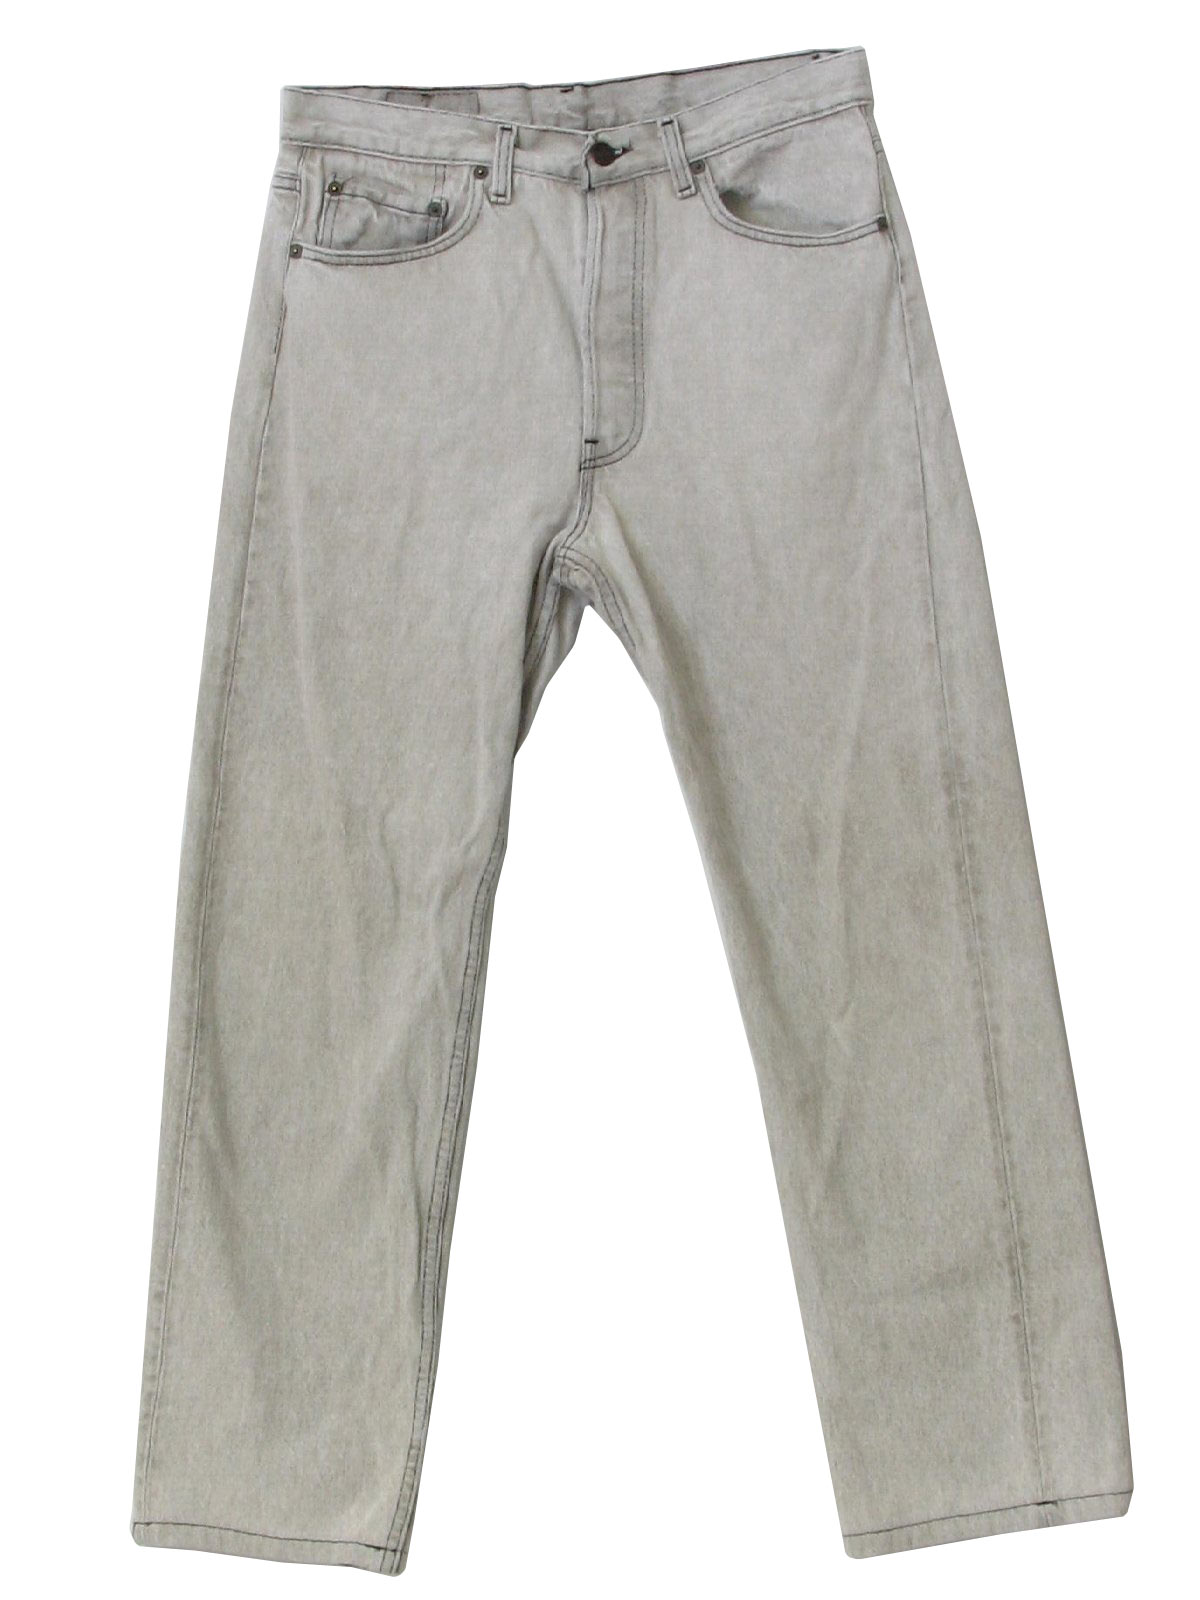 80's Vintage Pants: 80s -Levis 501- Mens grey stone wash totally 80s ...